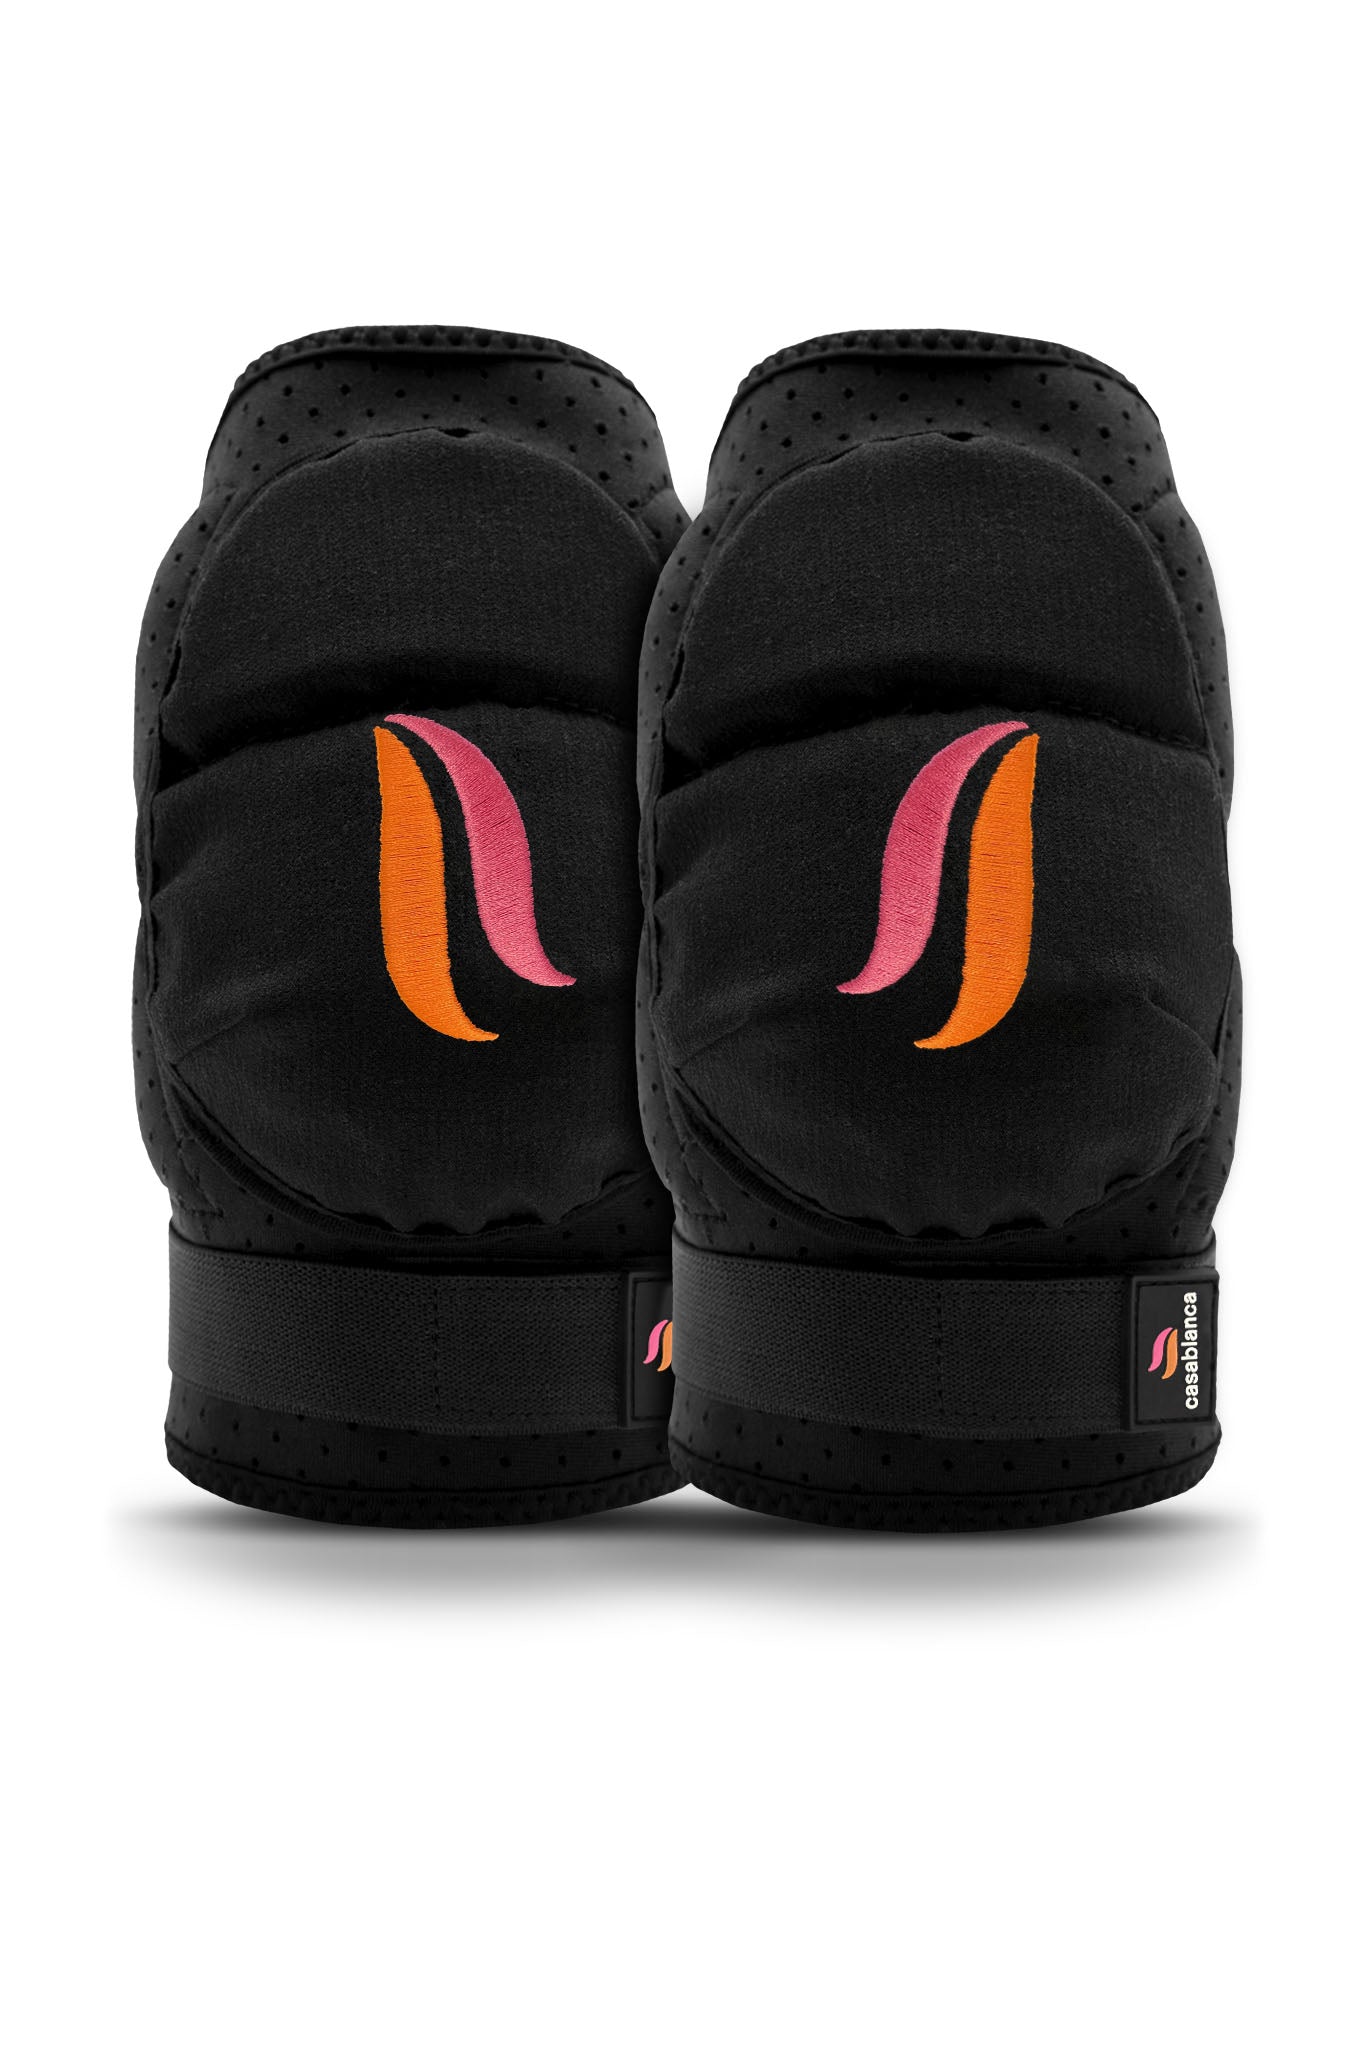 HS Elbow Pads